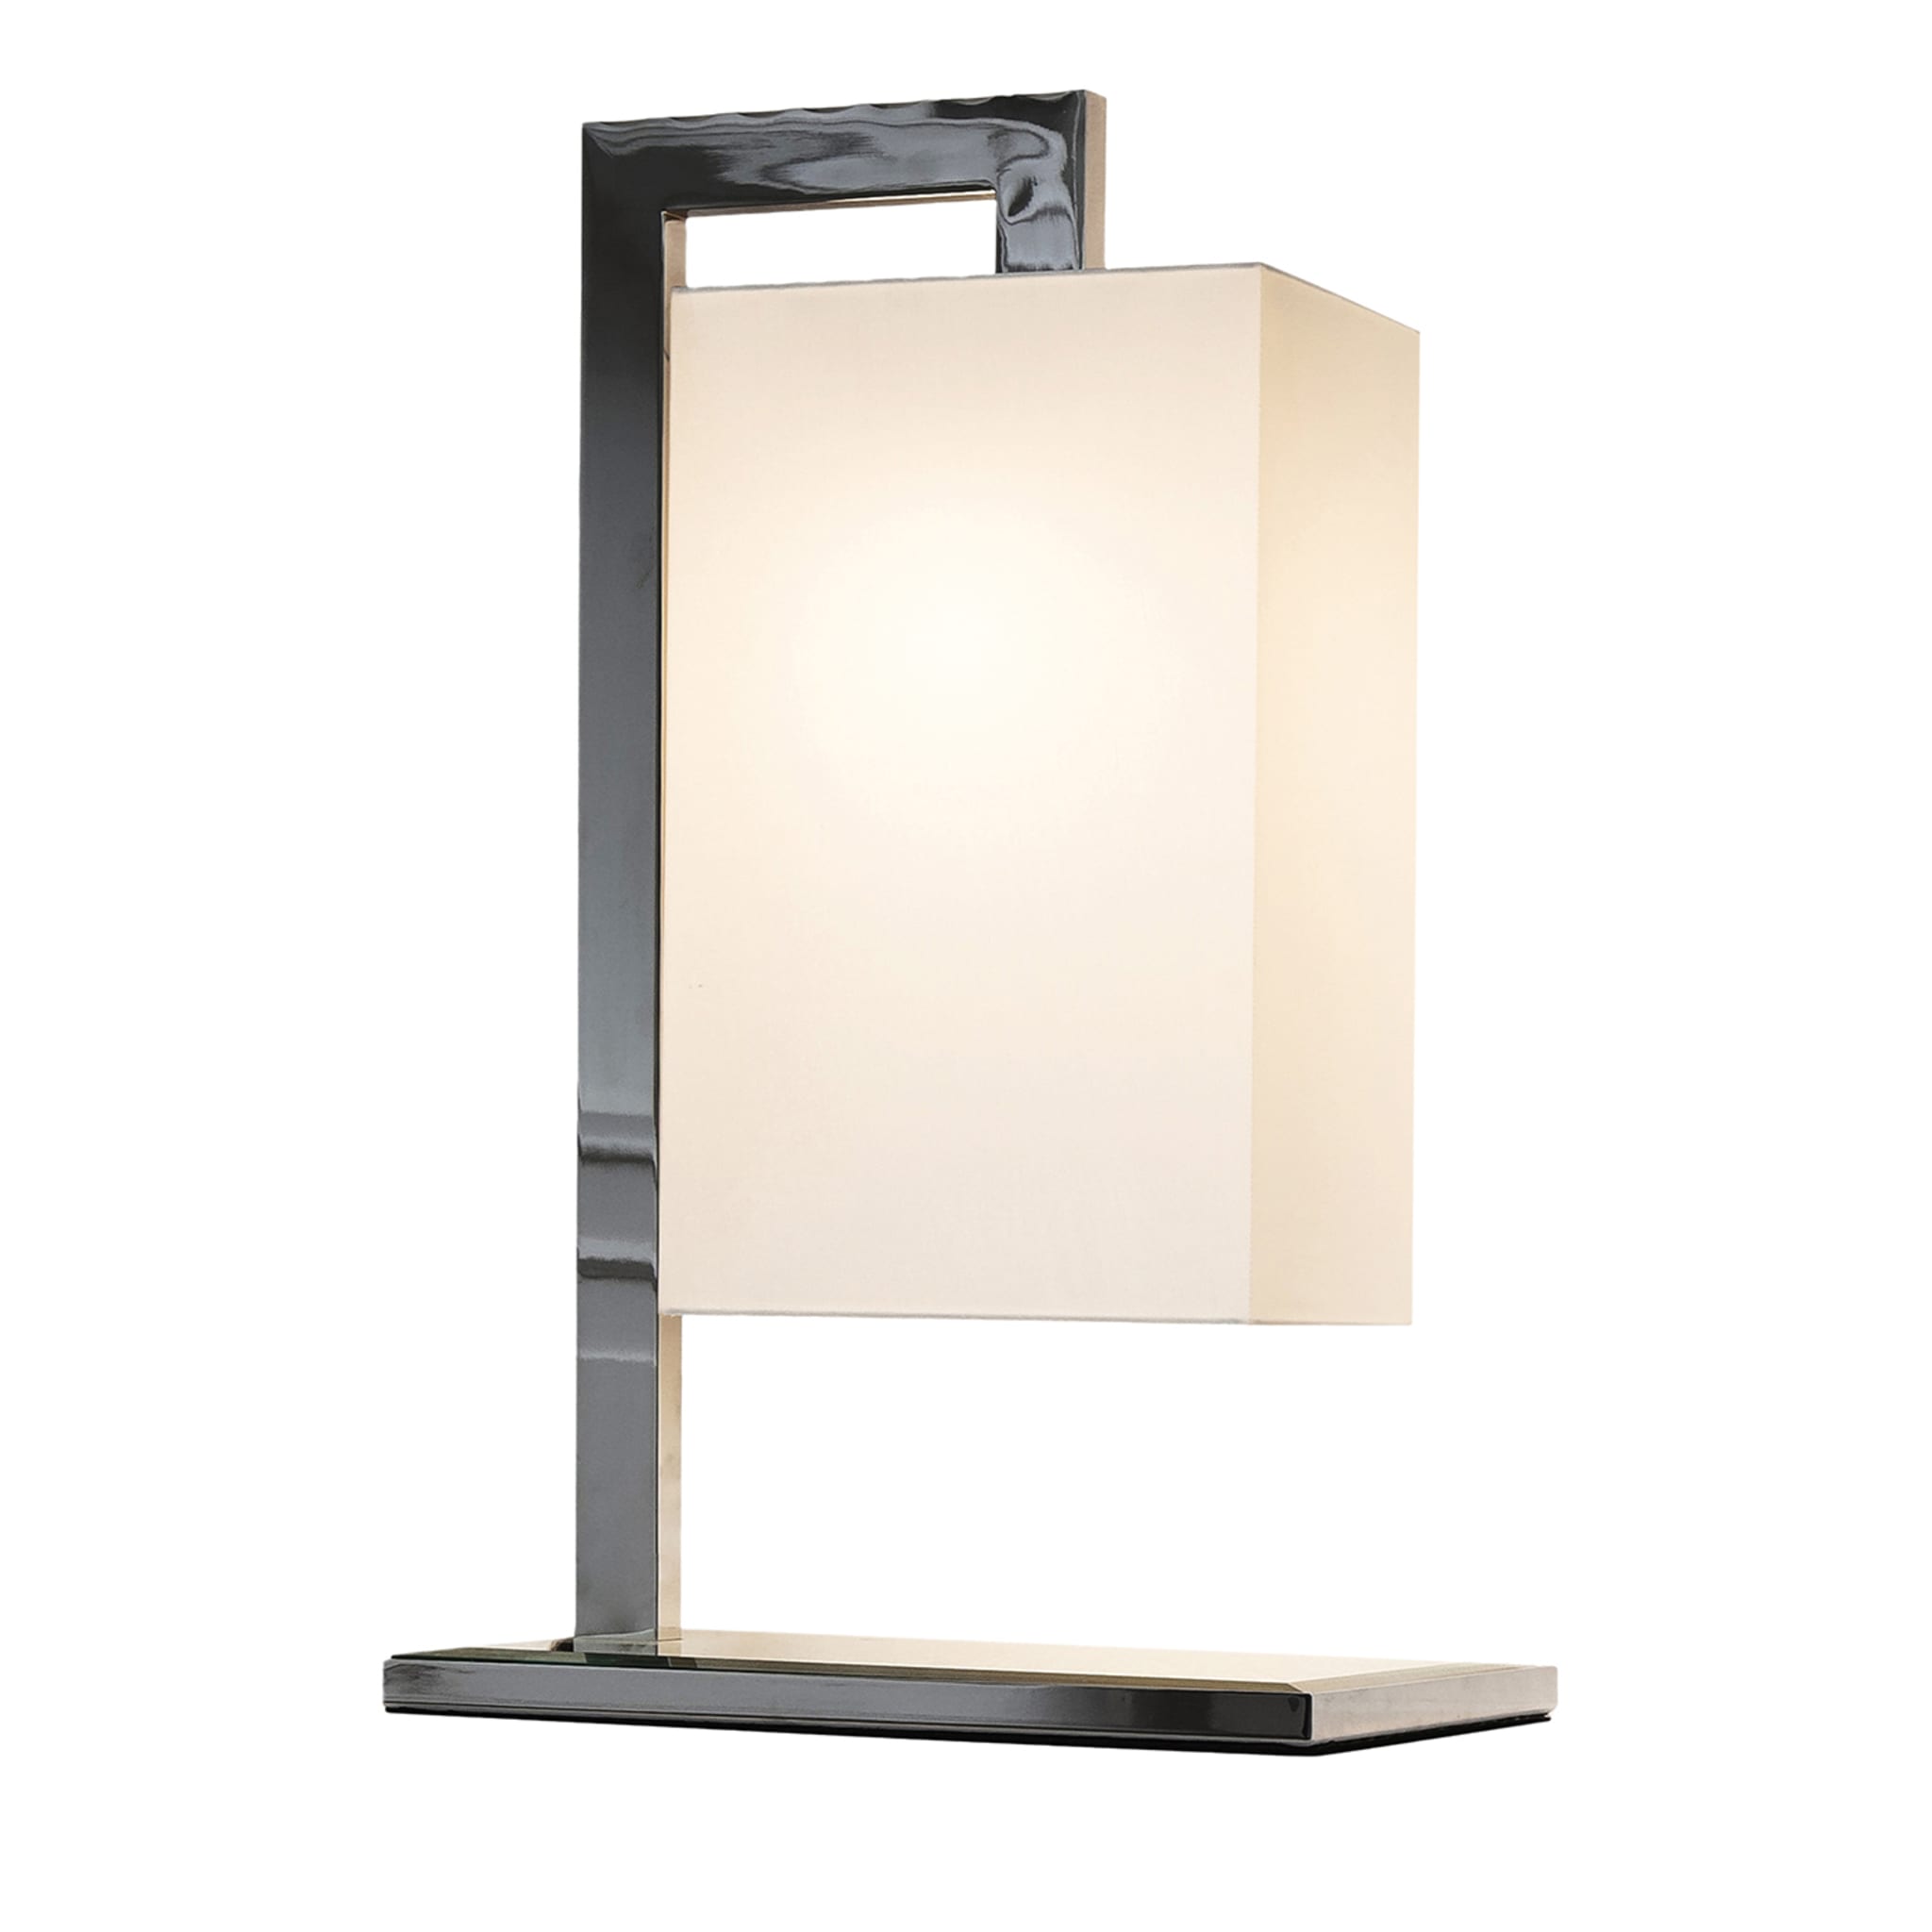 Coco Deluxe Nickel Table Lamp - Main view